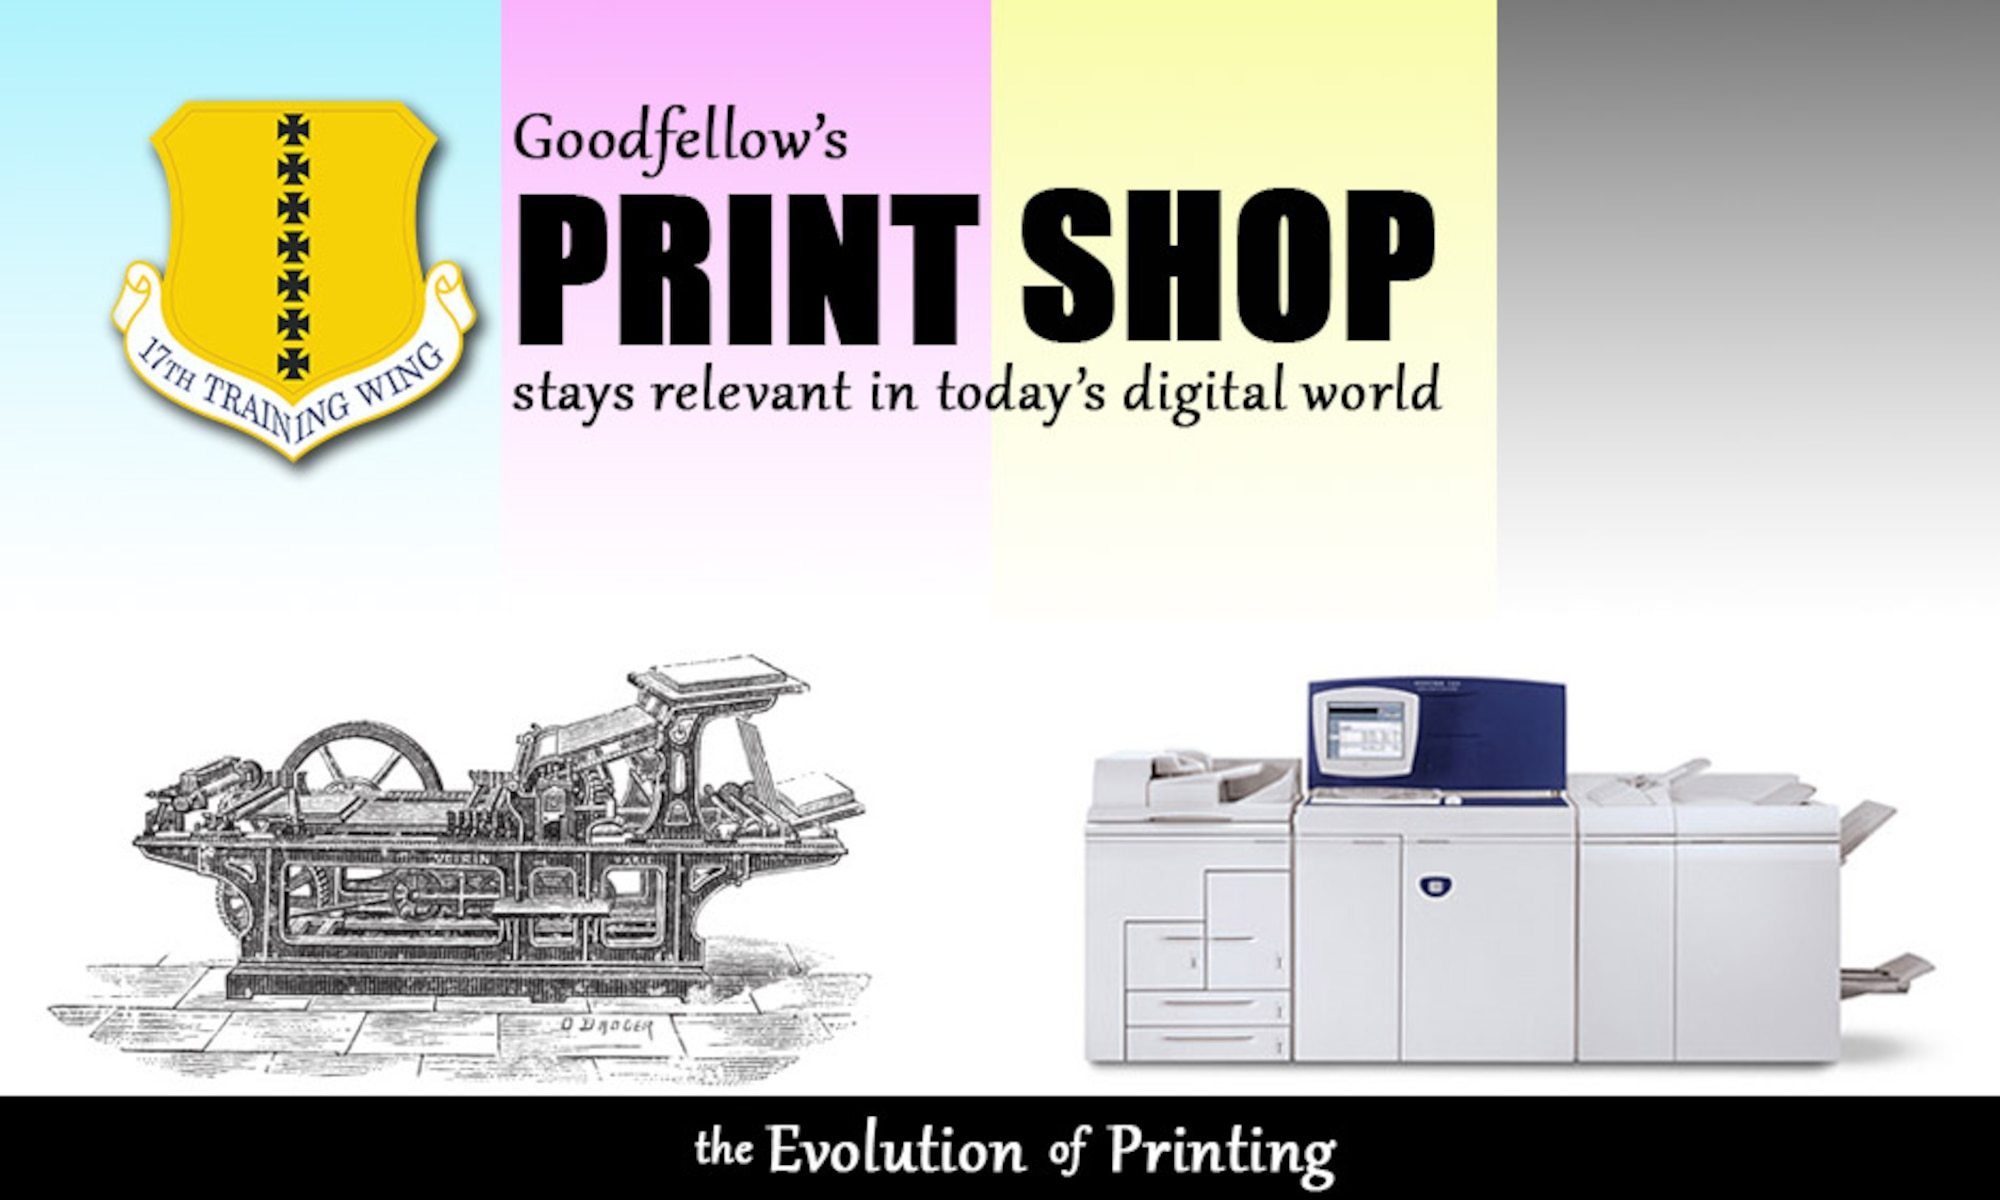 Goodfellow's print shop stays relevant today's digital world > Goodfellow Air Force Base > Display